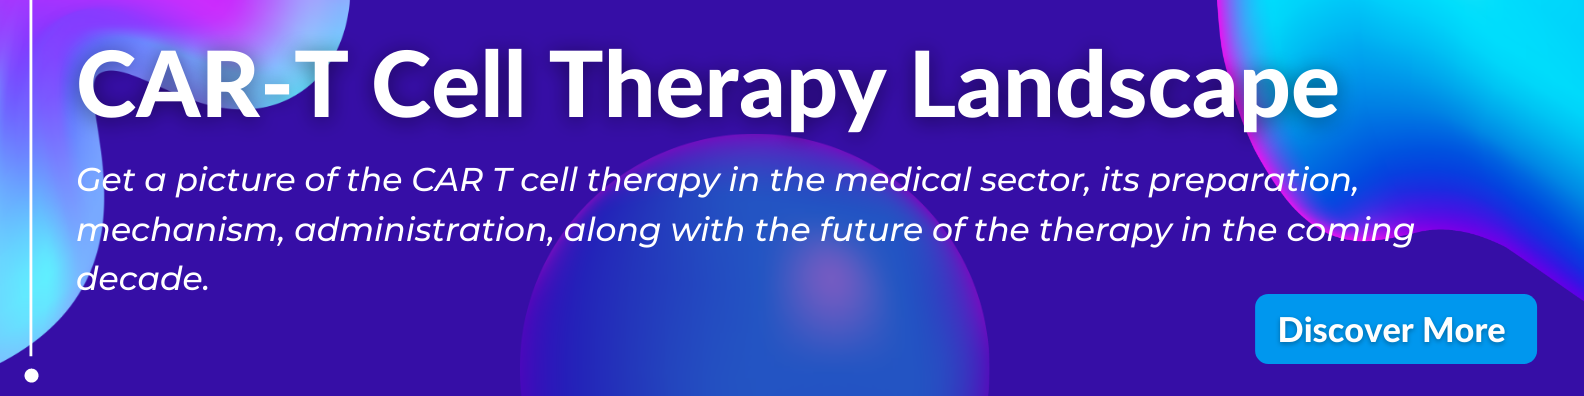 car-t-cell-therapy-landscape